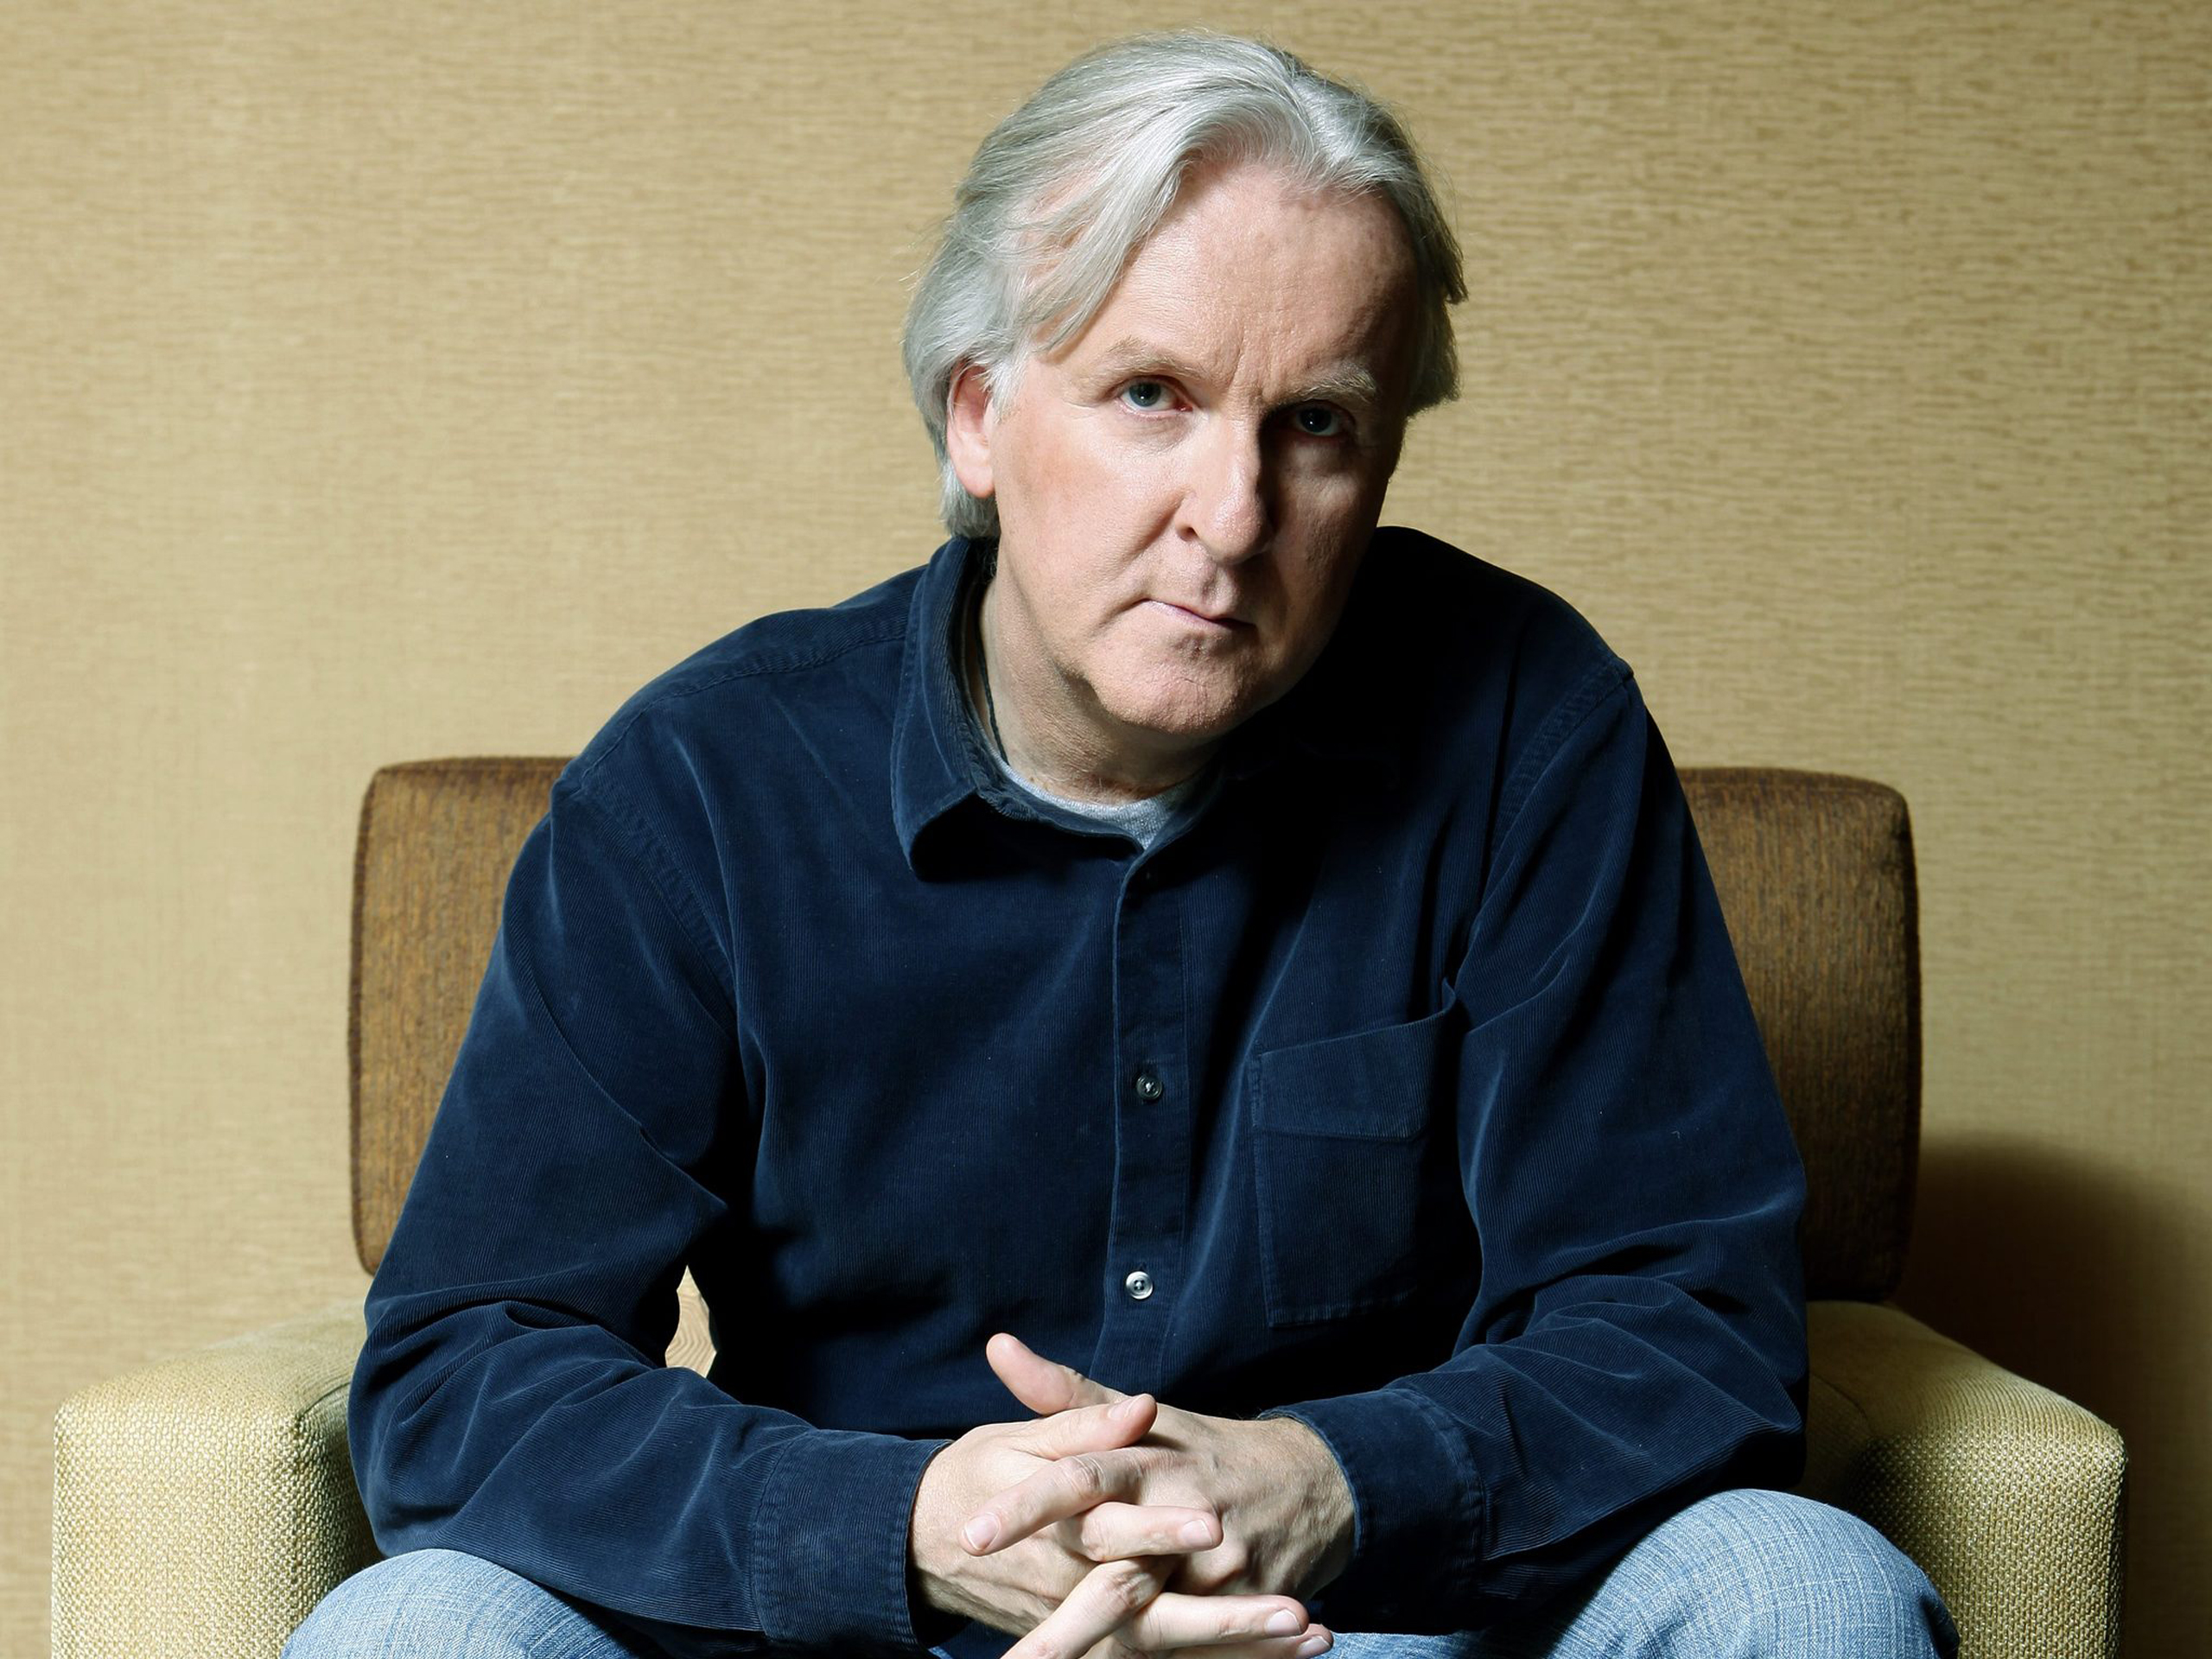 How rich is James Cameron?